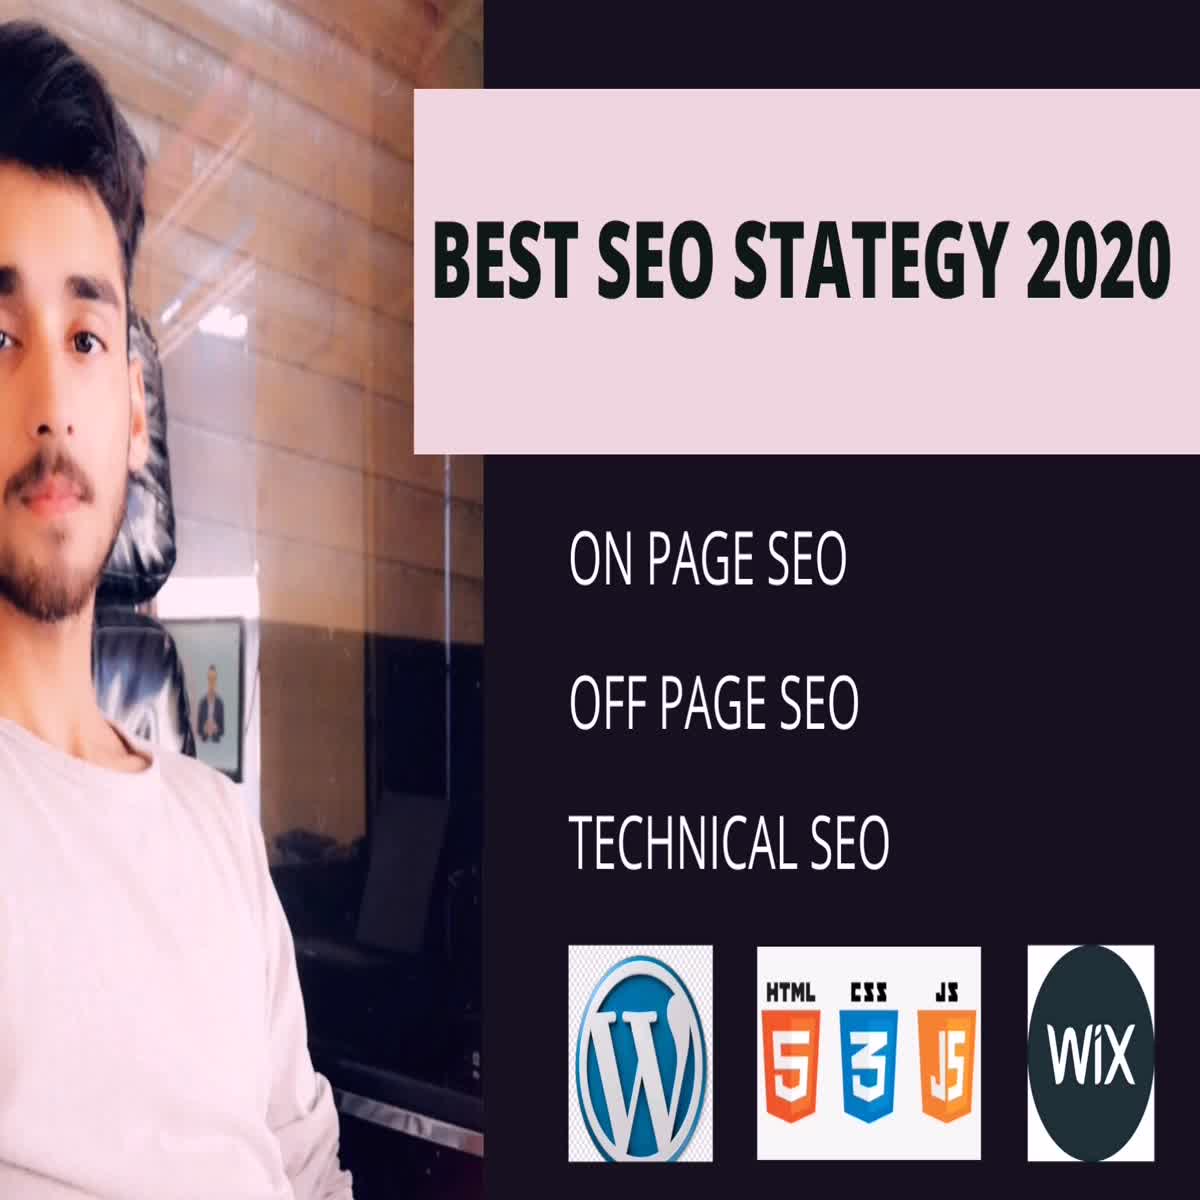 I will implement SEO service with high quality backlinks